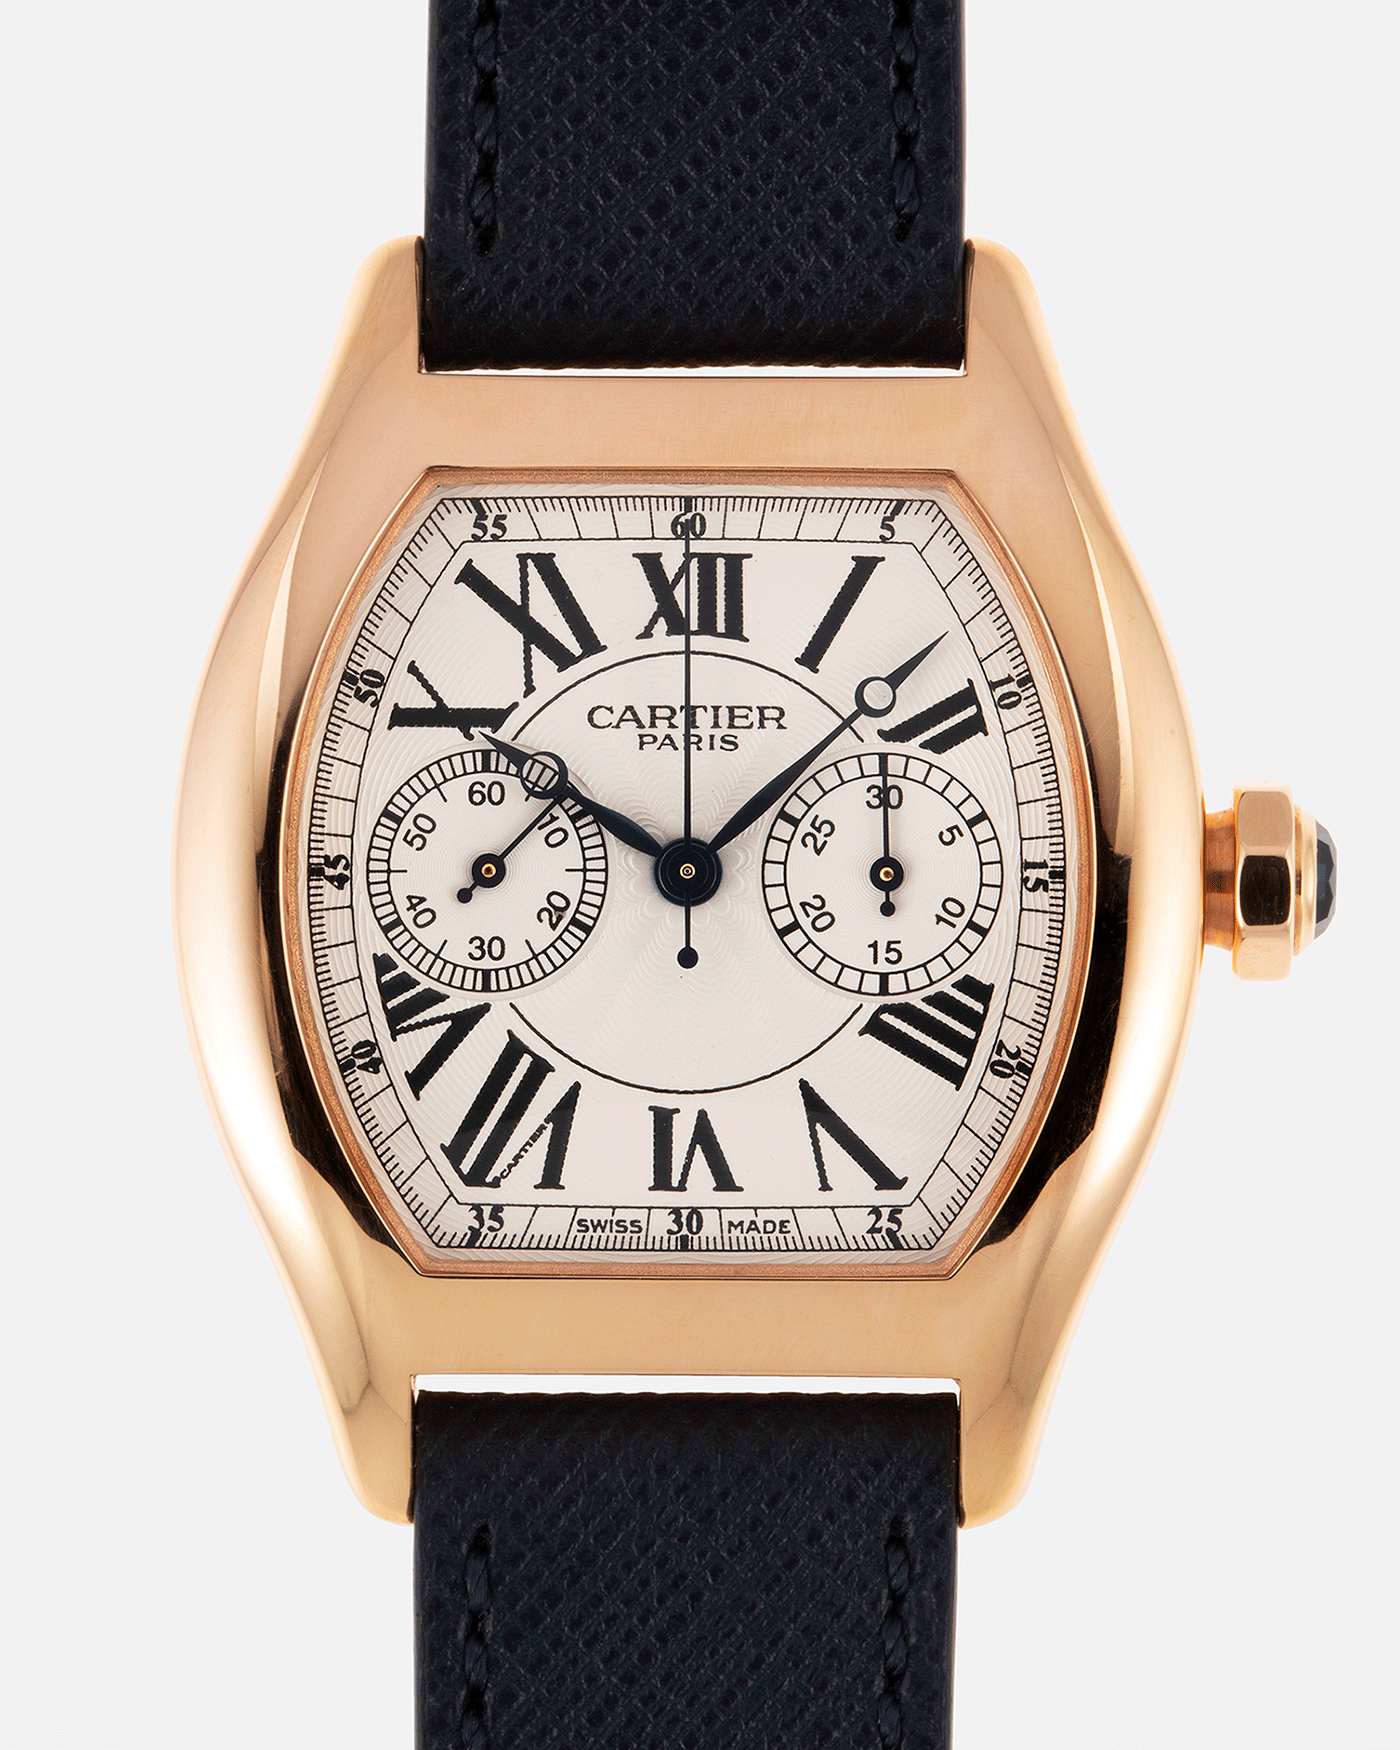 Brand: Cartier Year: 2000’s Model: CPCP Collection Prive Tortue Monopoussoir Reference: 2661 Material: 18k Rose Gold Movement: THA Cal. 045MC Case Diameter: 43 x 35 mm Strap: Navy Blue Molequin Textured Calf Strap with separate 18k Cartier Rose Gold Deployant